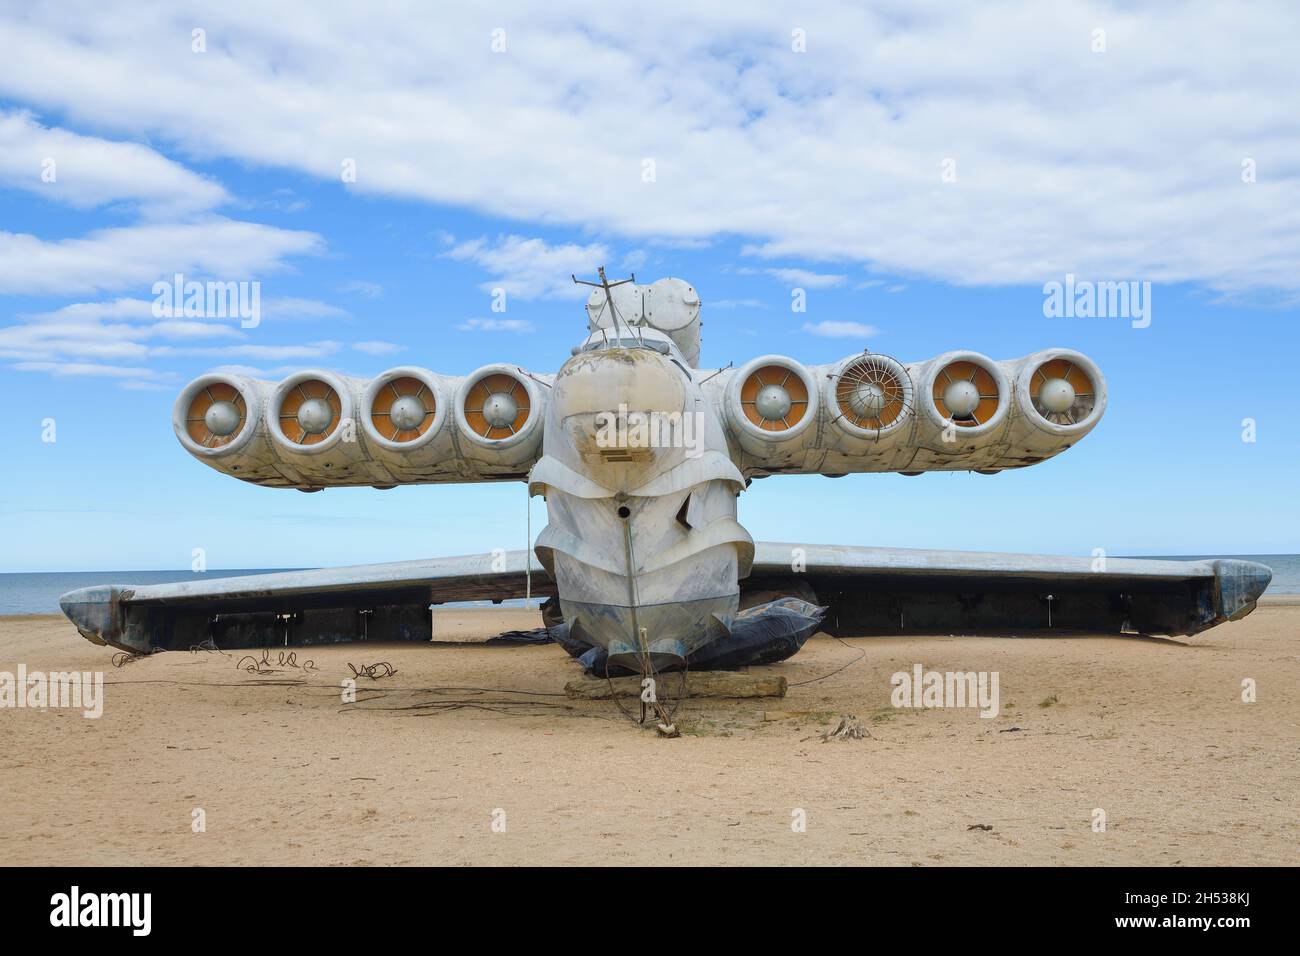 DERBENT, RUSSIA - SEPTEMBER 27, 2021: Rocket  aerodynamic craft Lun (project 903). Front view Stock Photo